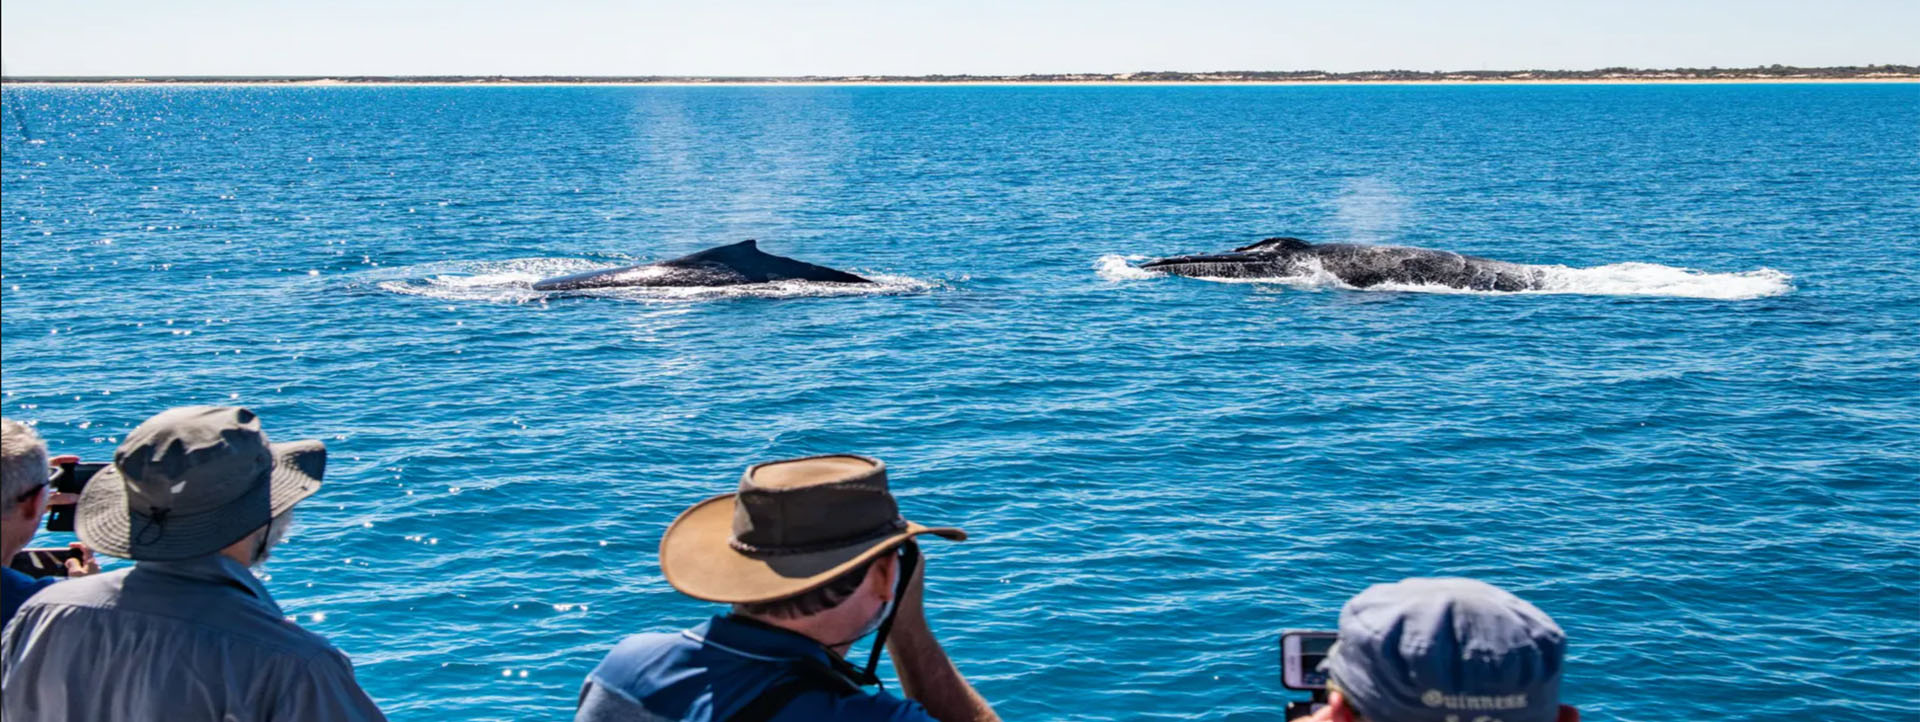 BROOME WHALE WATCHING people on deck